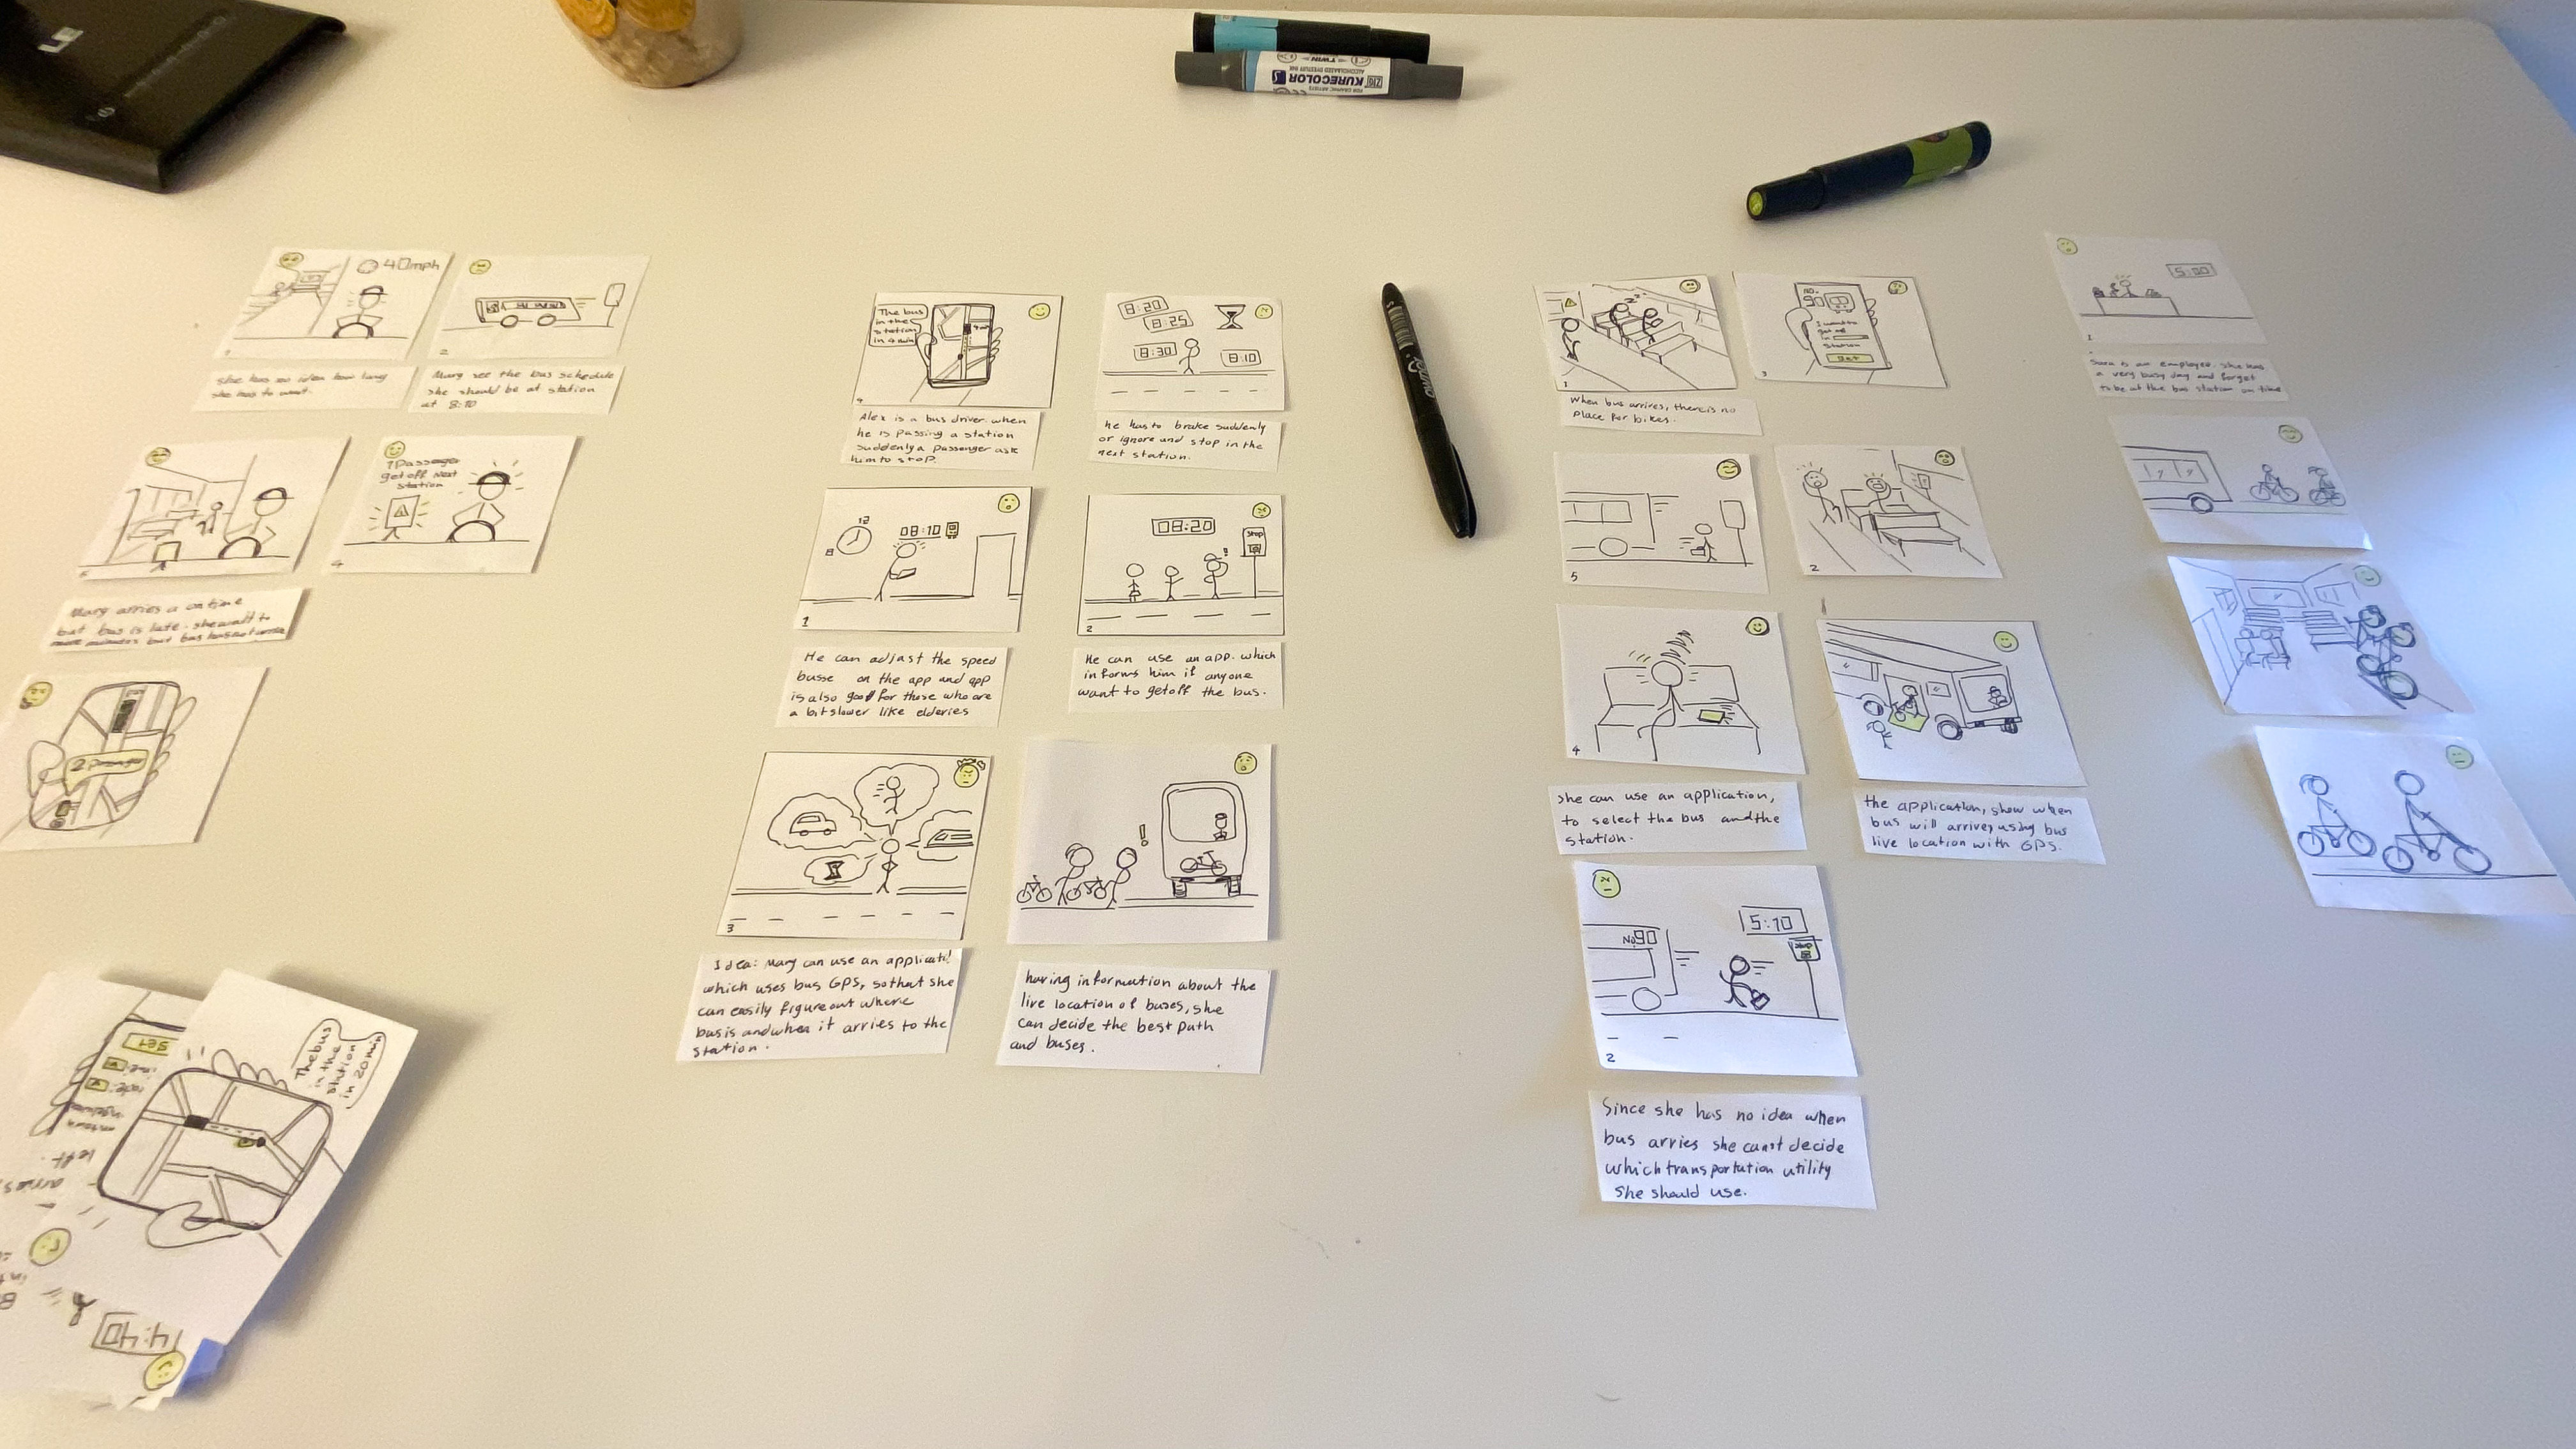 Fig.2: An example using storyboarding in an application I have designed to improve the experience of using public transportation.